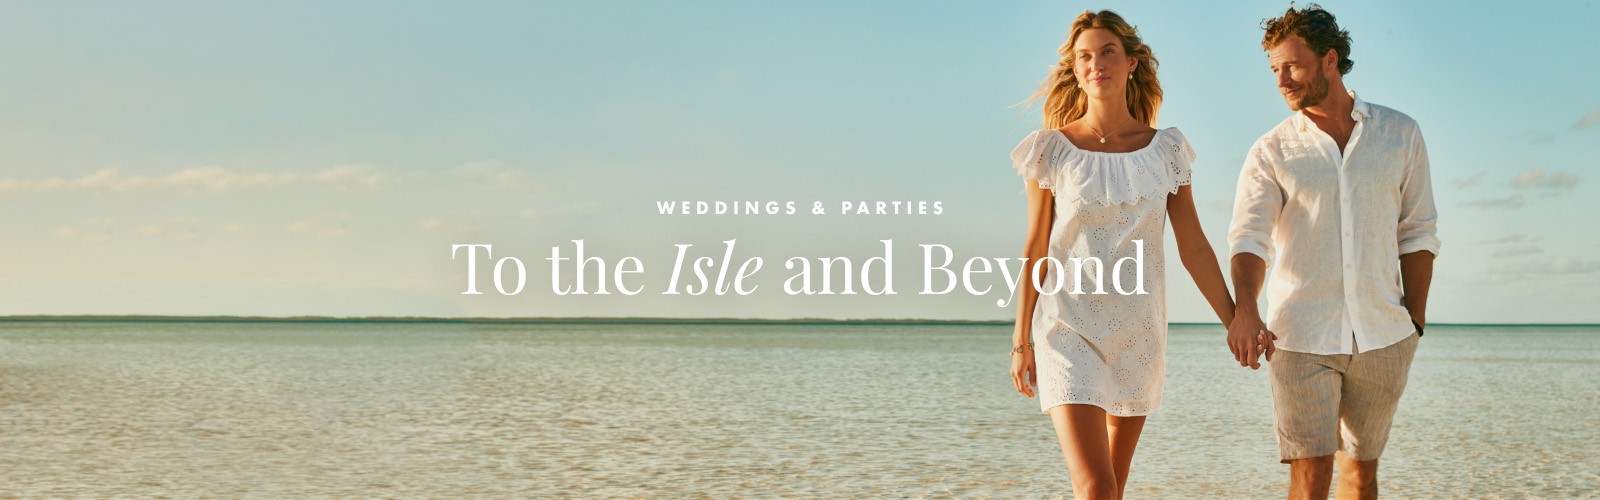 Weddings & Parties - To the Isle and Beyond